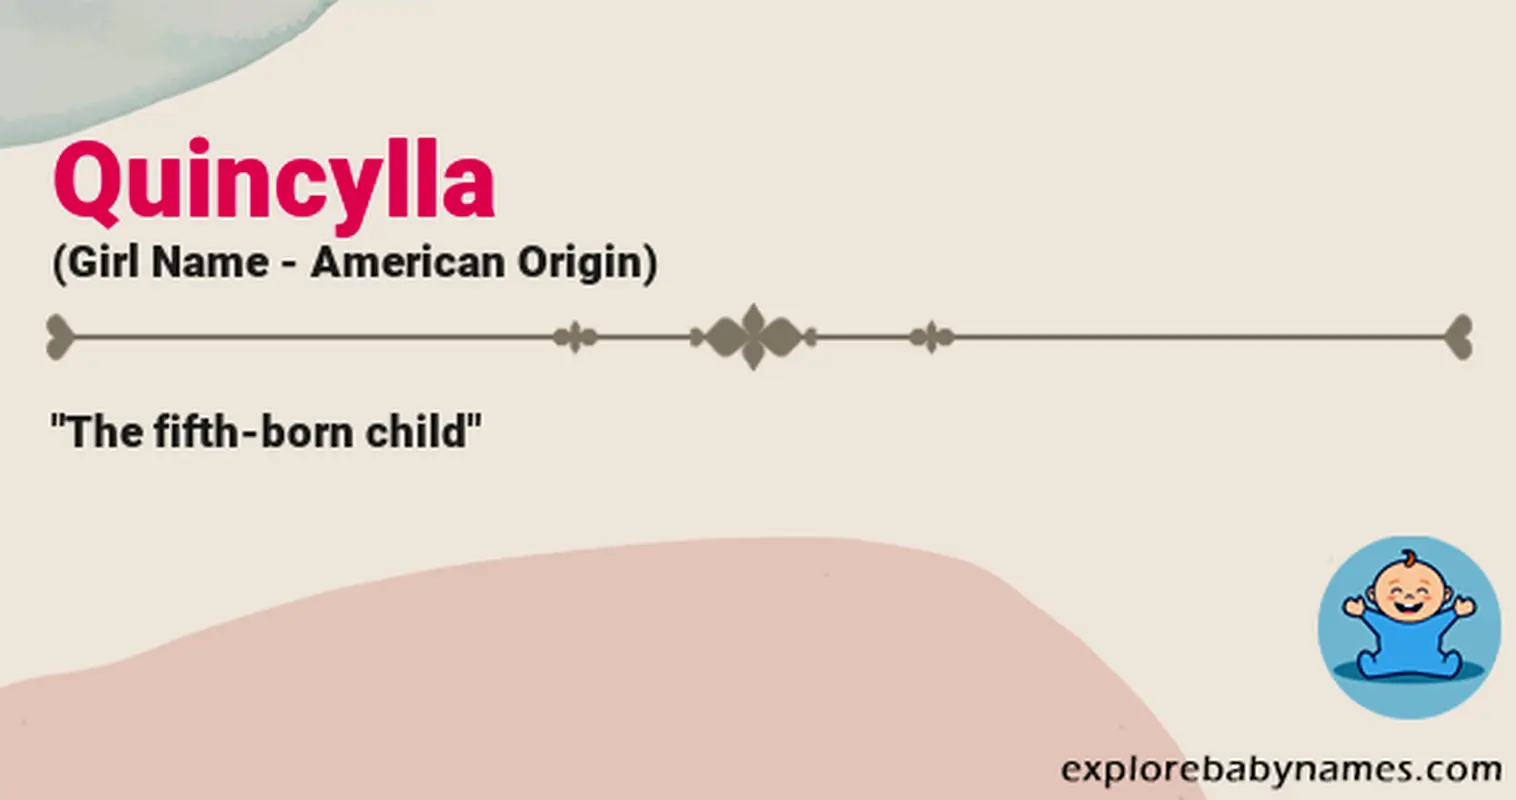 Meaning of Quincylla